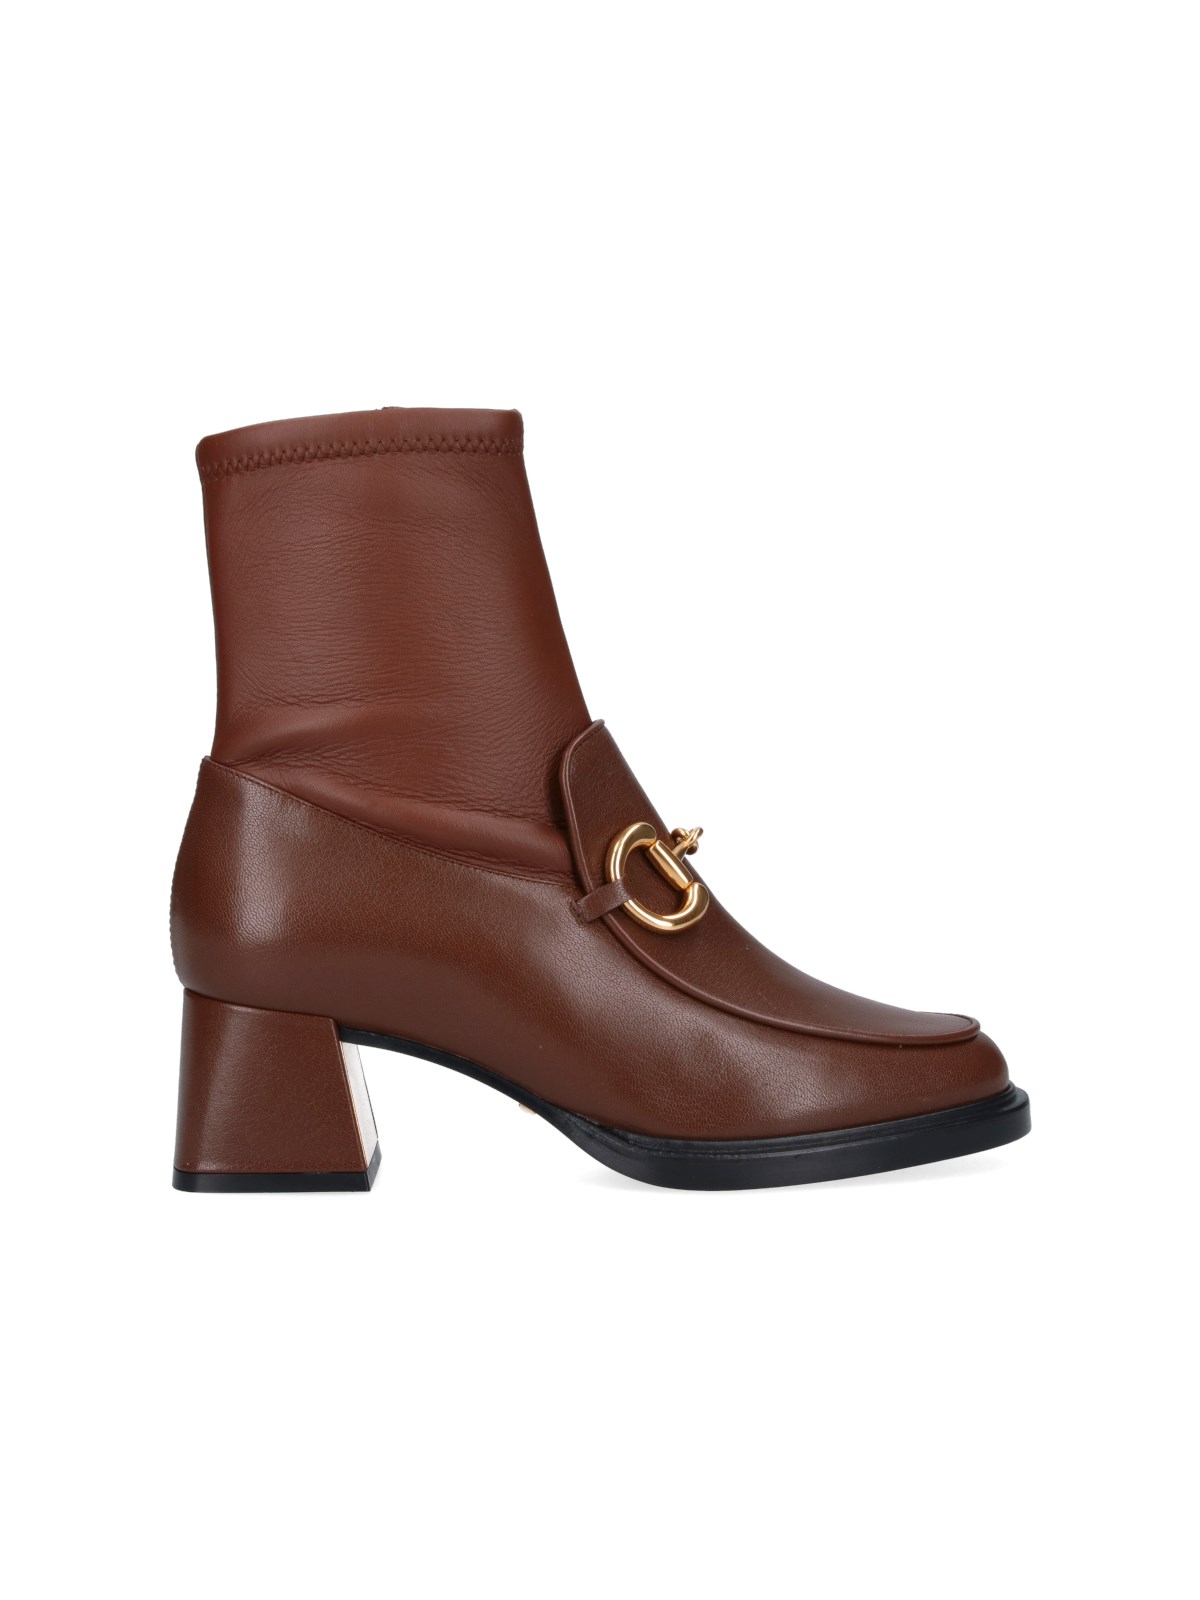 Gucci Boots Horsebit Detail In Brown